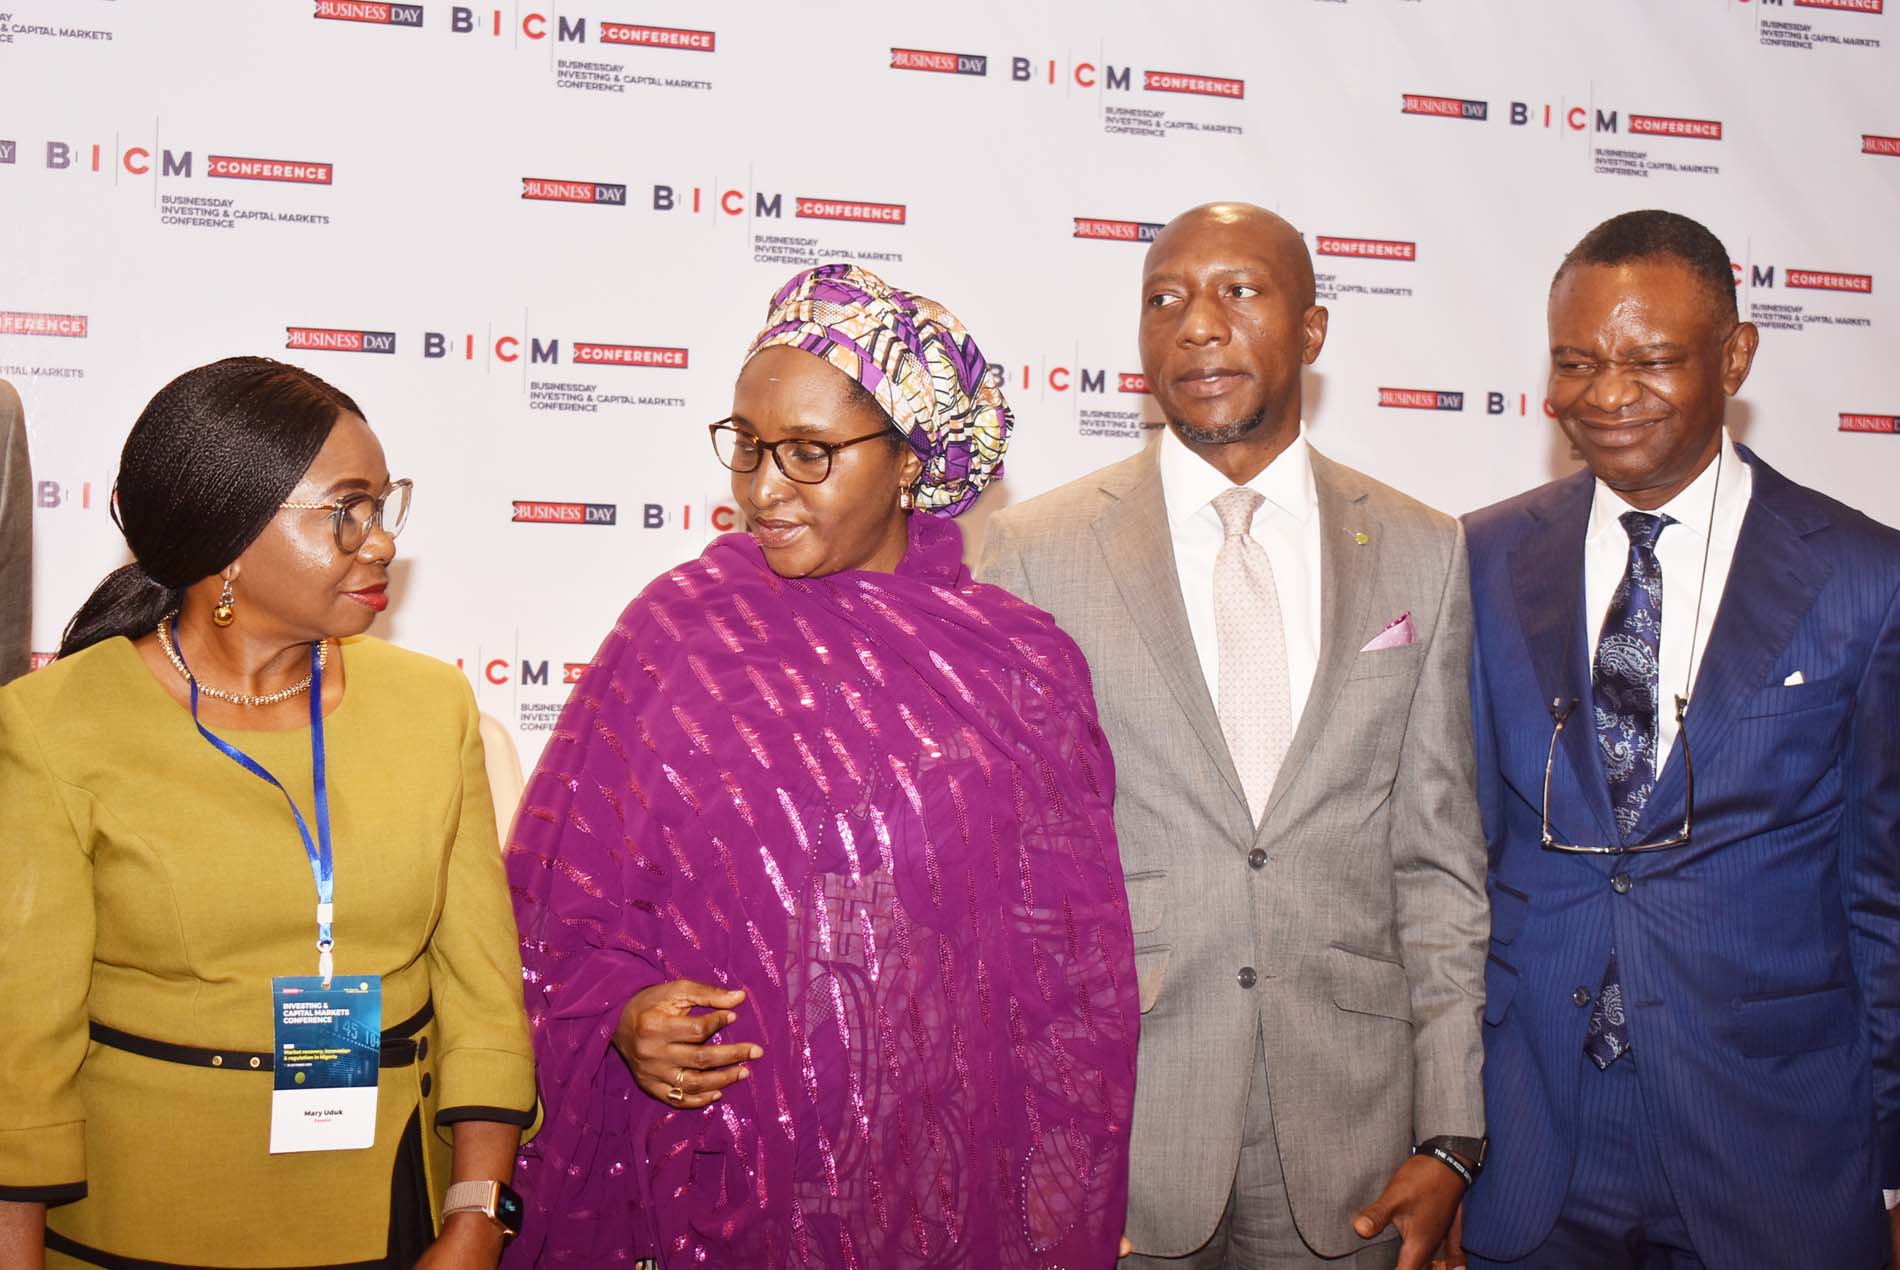 L-R,  Acting Director General, Securities and Exchange Commission  Ms Mary Uduk, Minister of Finance Hajia Zainab Ahmed, CEO Nigerian Stock Exchange Mr Oscar Onyema and Publisher Business Day Media Mr Frank Aigbogun during the Investing and Capital Markets Conference in Abuja, Thursday